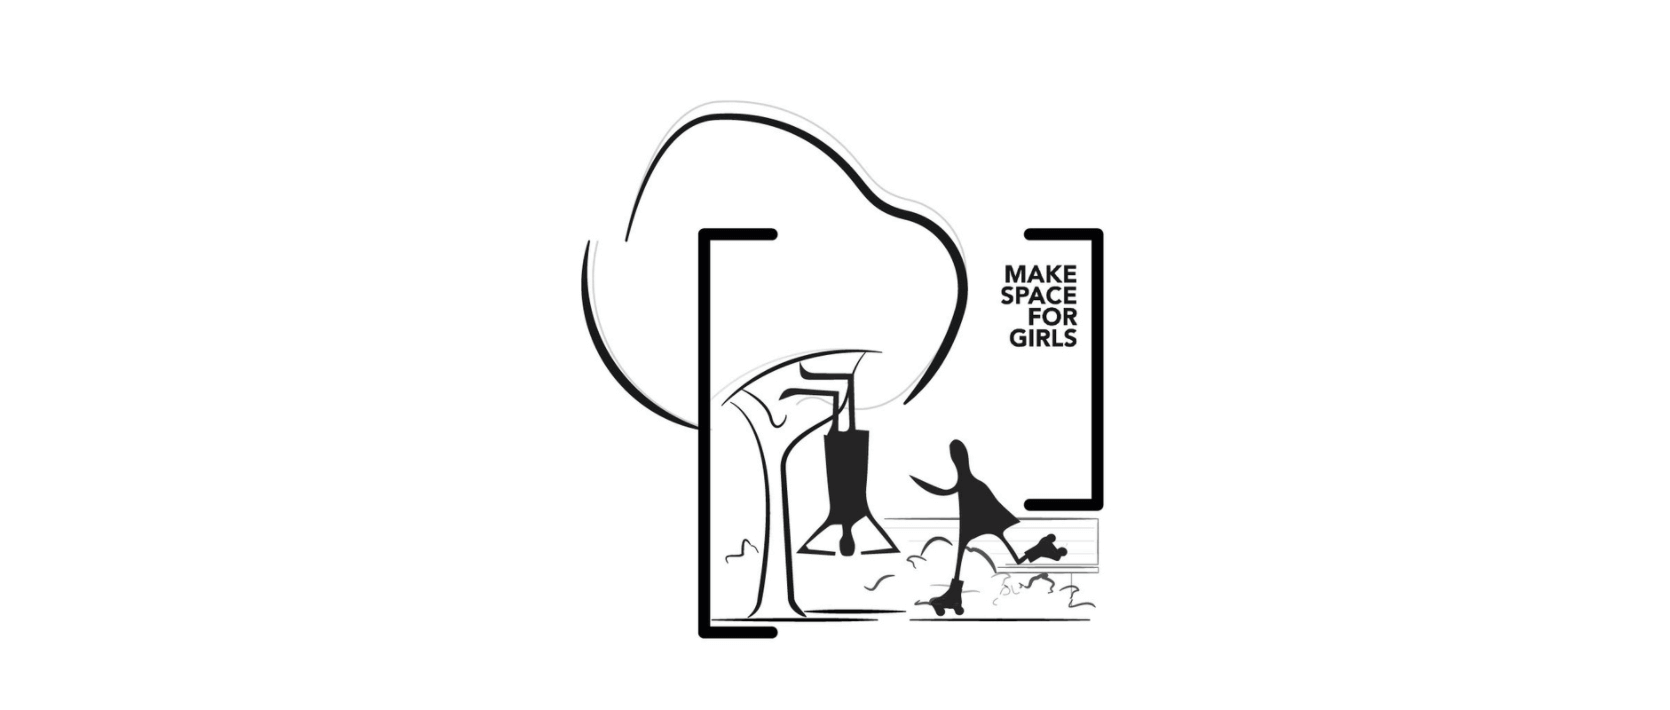 Make space for girls